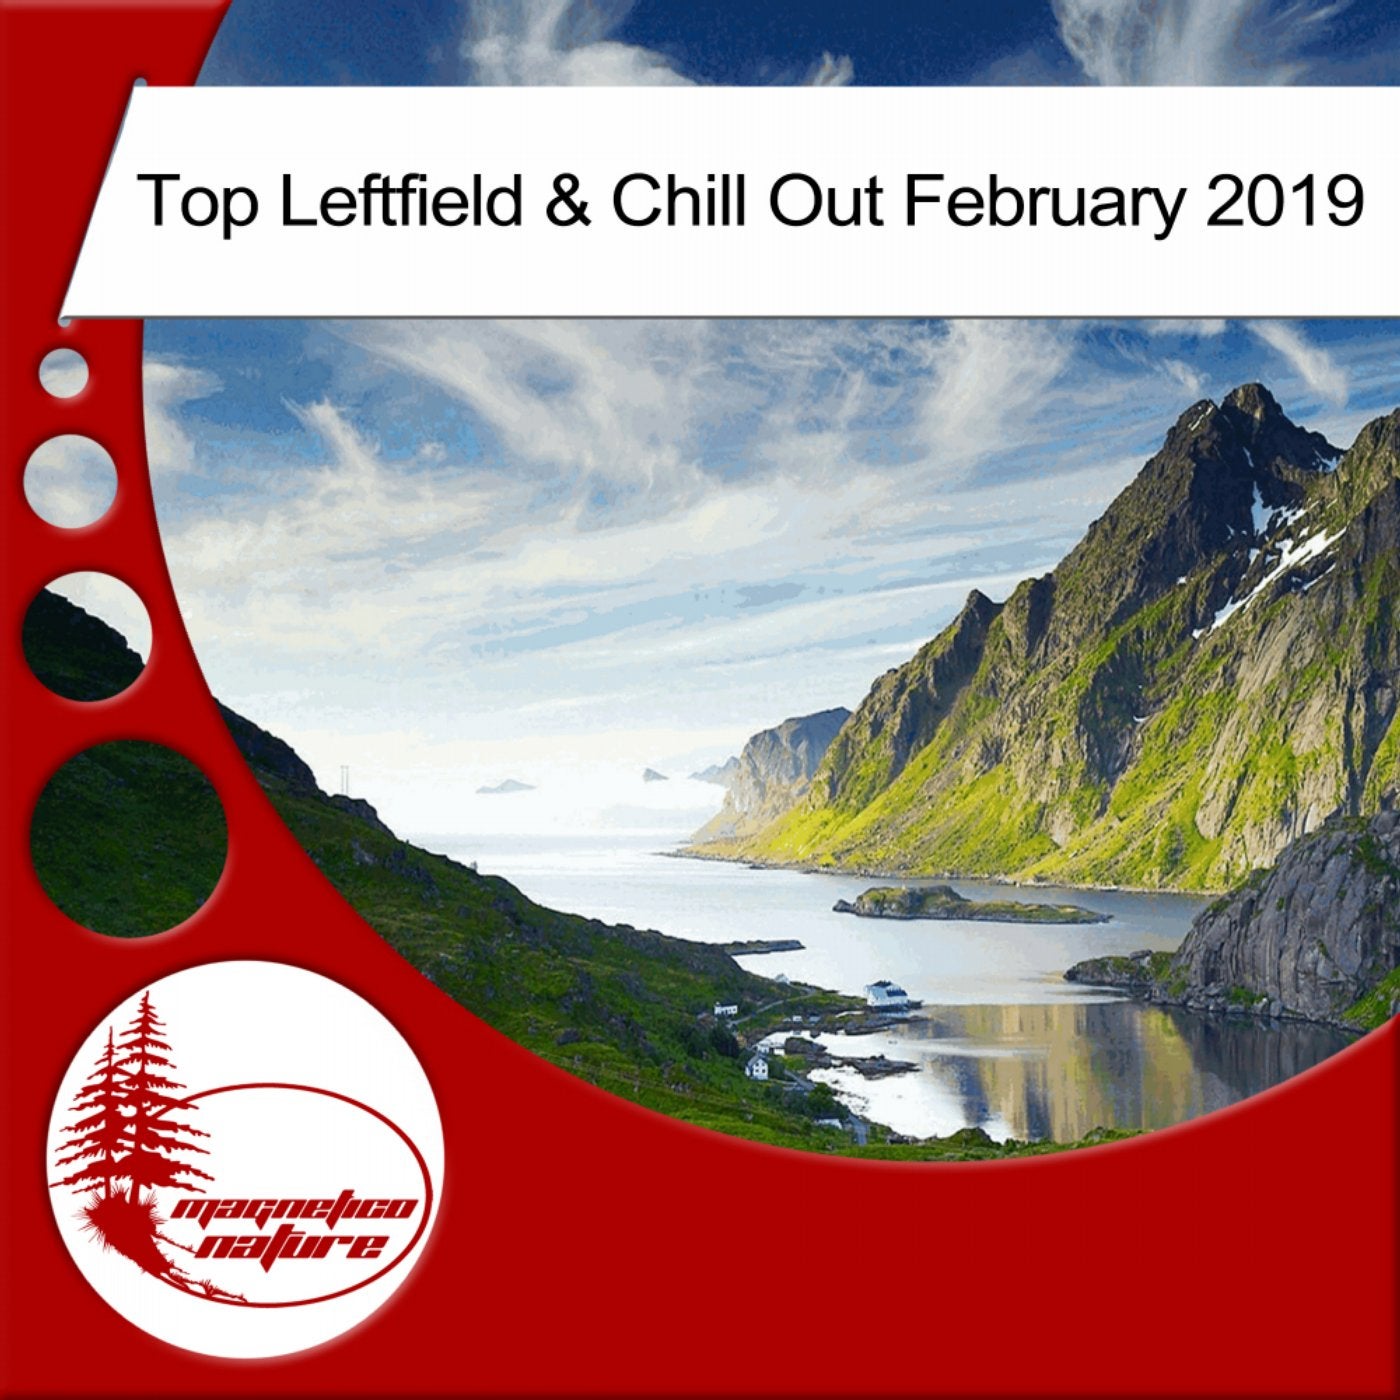 Top Leftfield & Chill Out February 2019